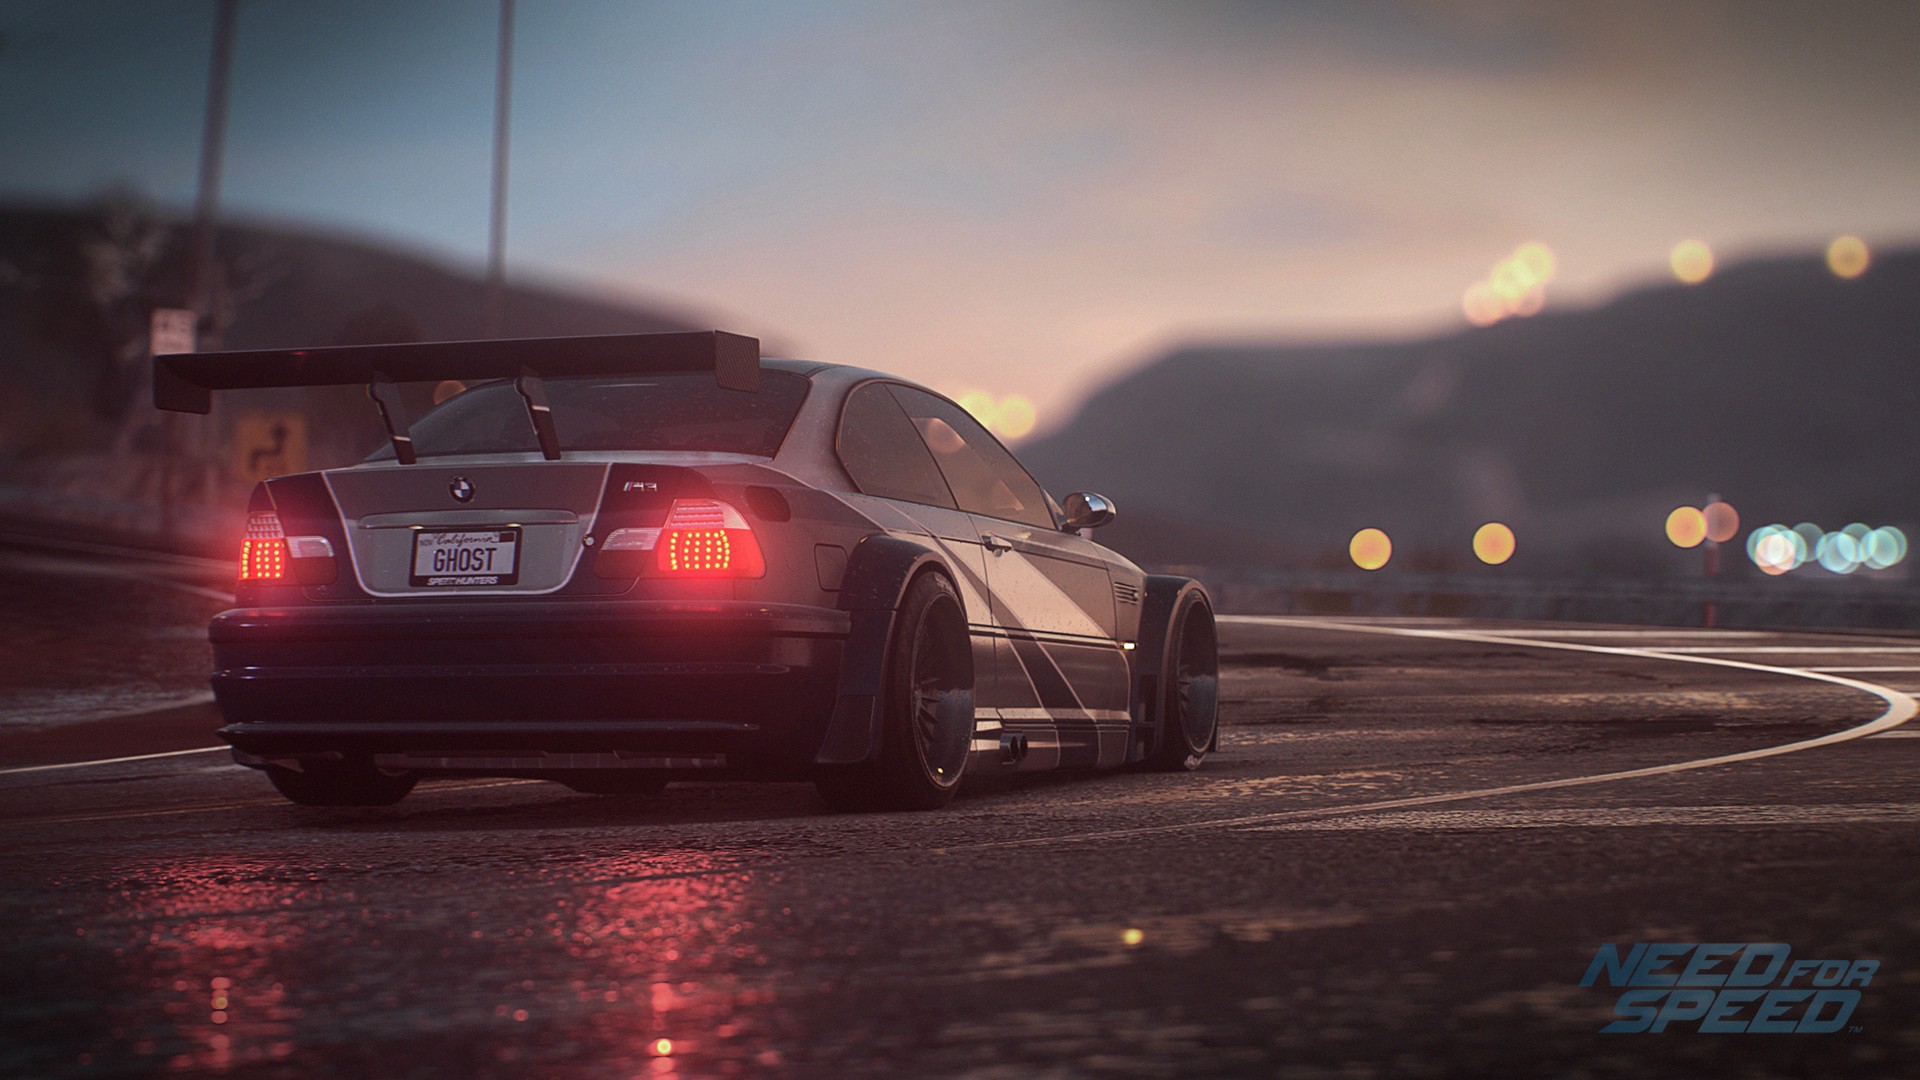 BMW M3 GTR, Vehicle, Car, Tuning, Road, Video games, Tailights, Depth of field, Need for Speed Wallpaper